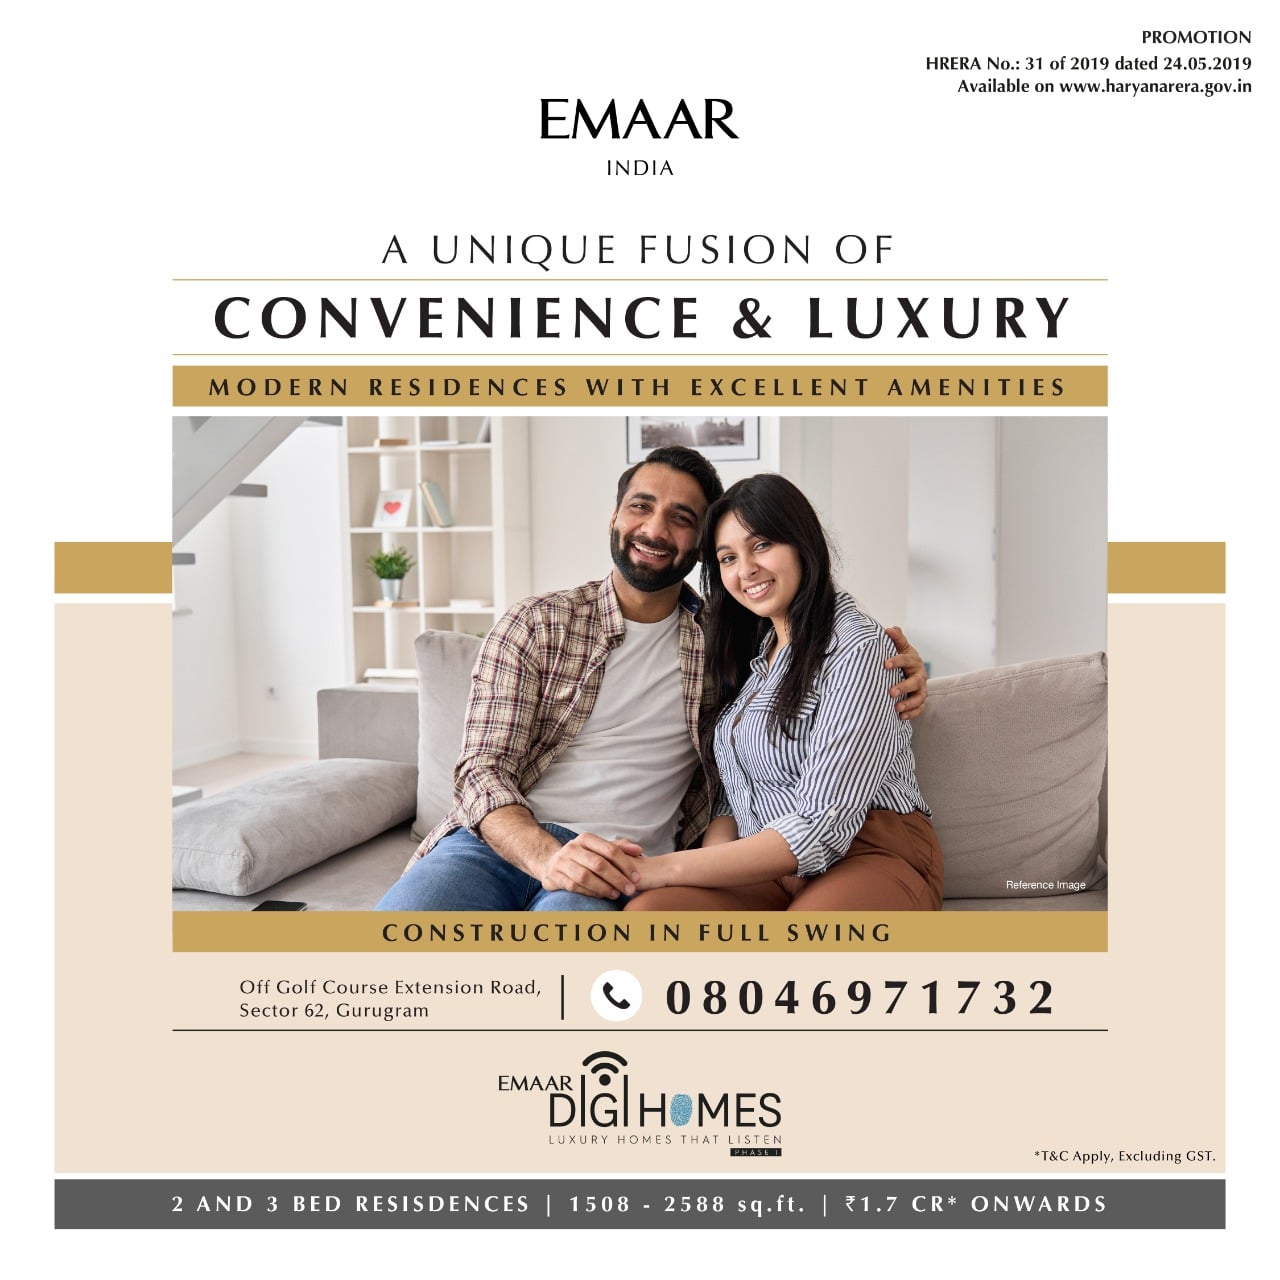 A unique fusion of convenience & luxury at Emaar Digi Homes in Gurgaon